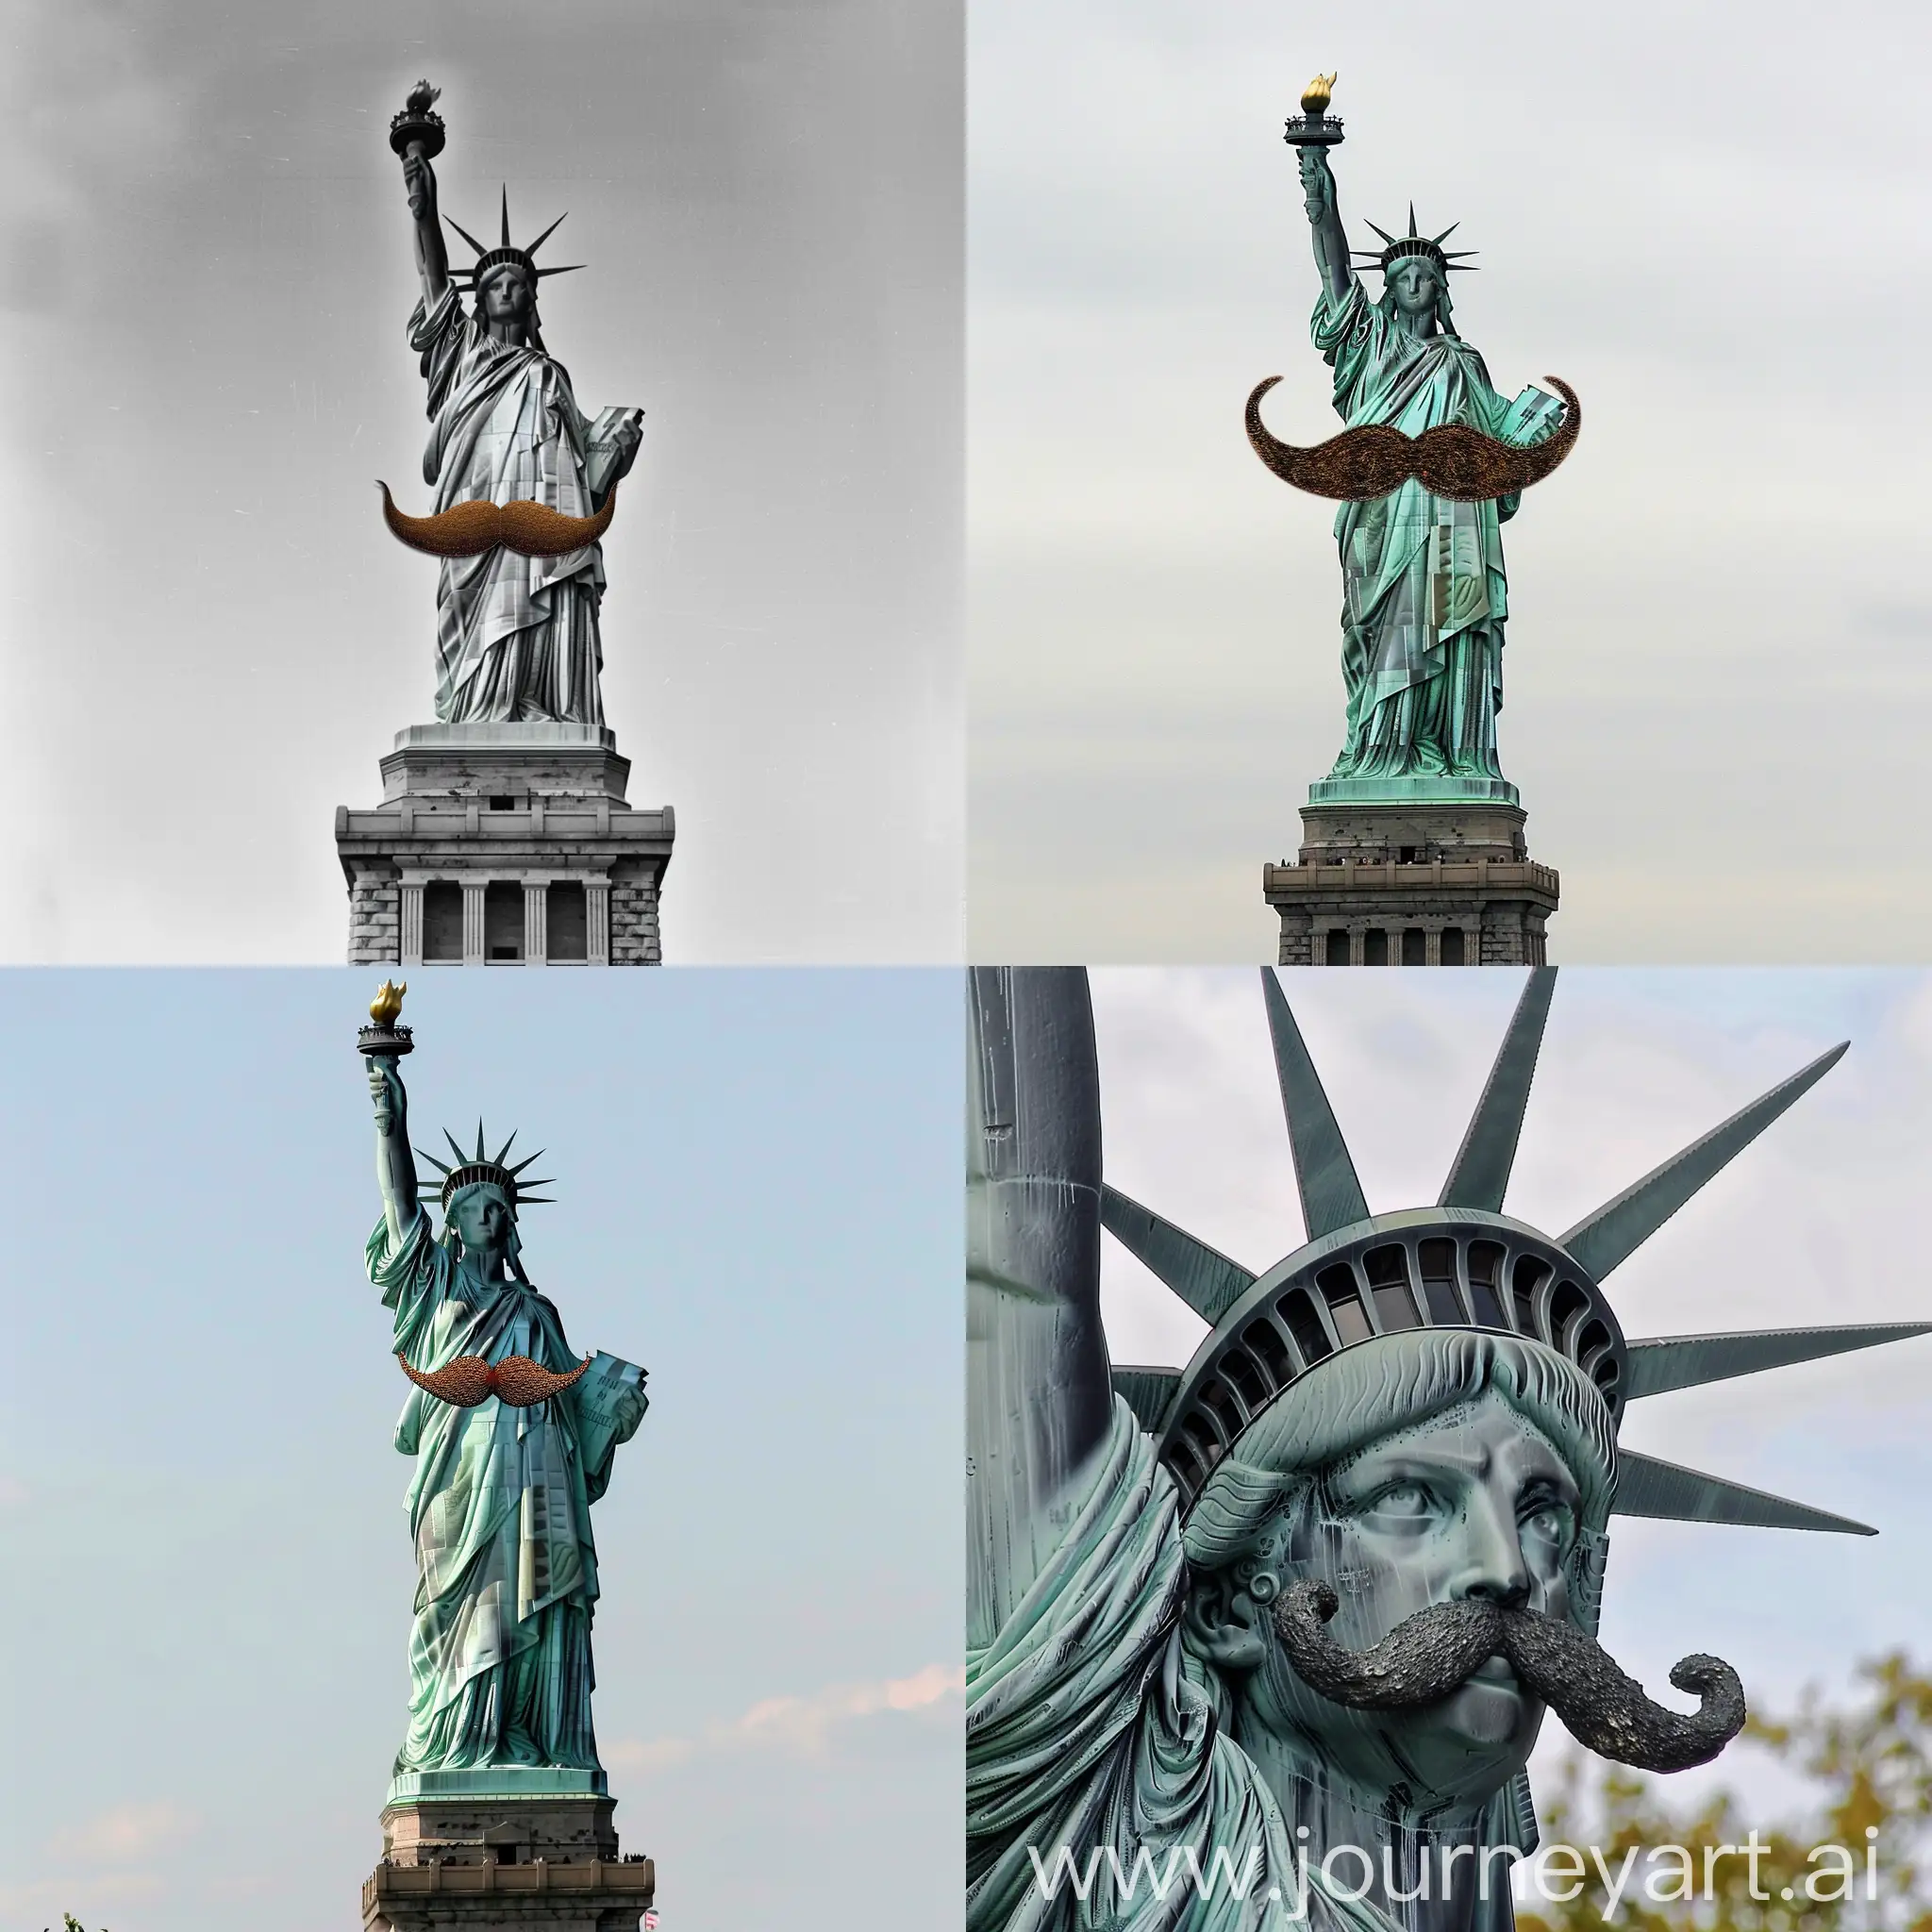 The statue of liberty with a moustache